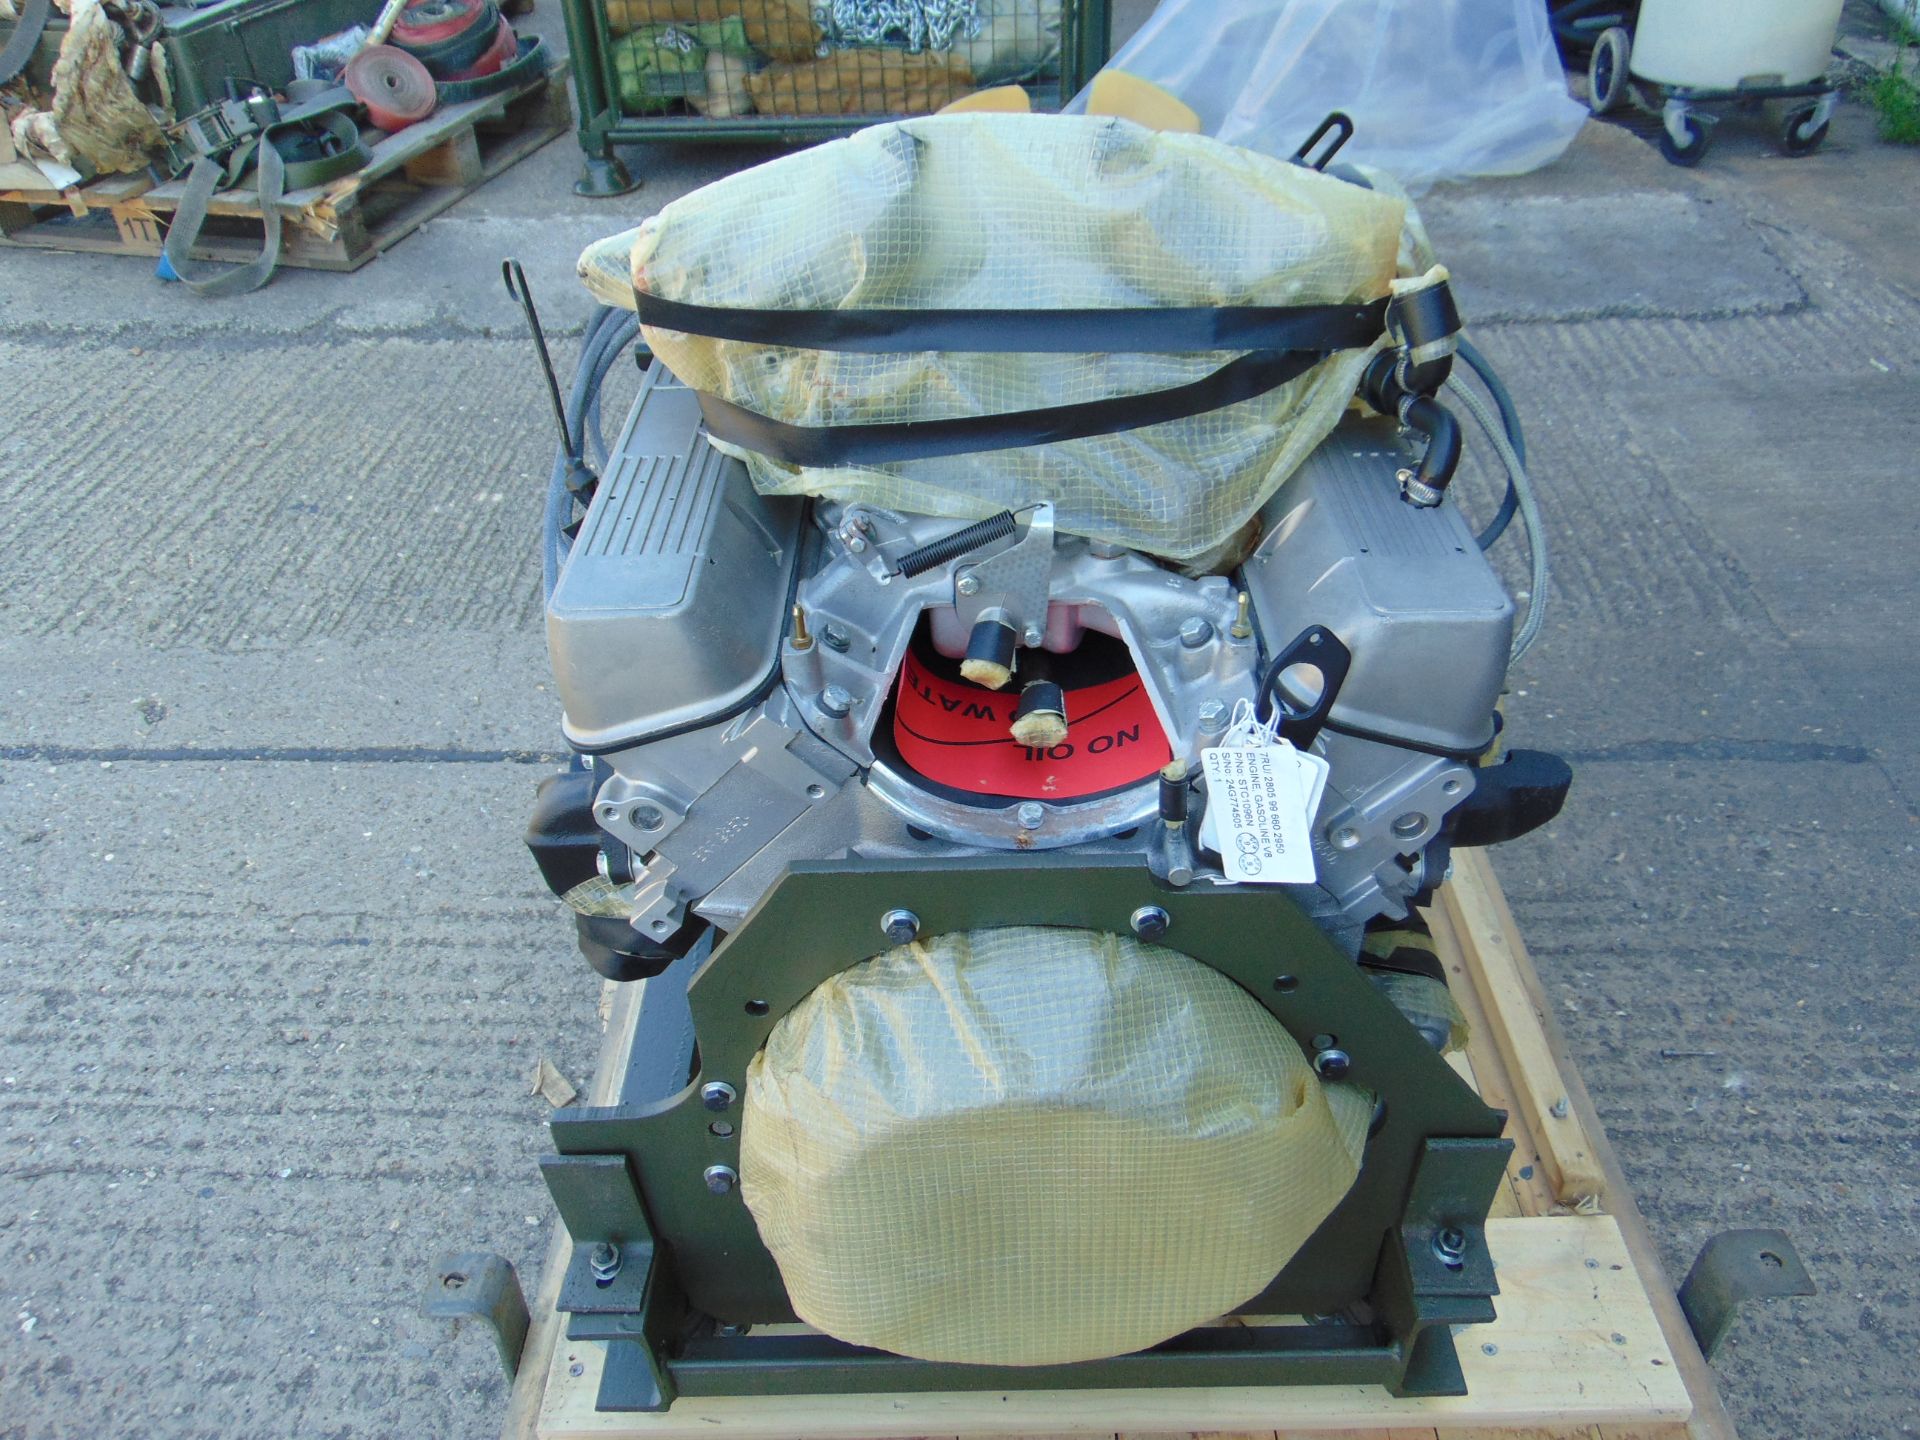 Fully Reconditioned Land Rover V8 Engine c/w all Accessories, as shown in Crate etc - Image 7 of 21